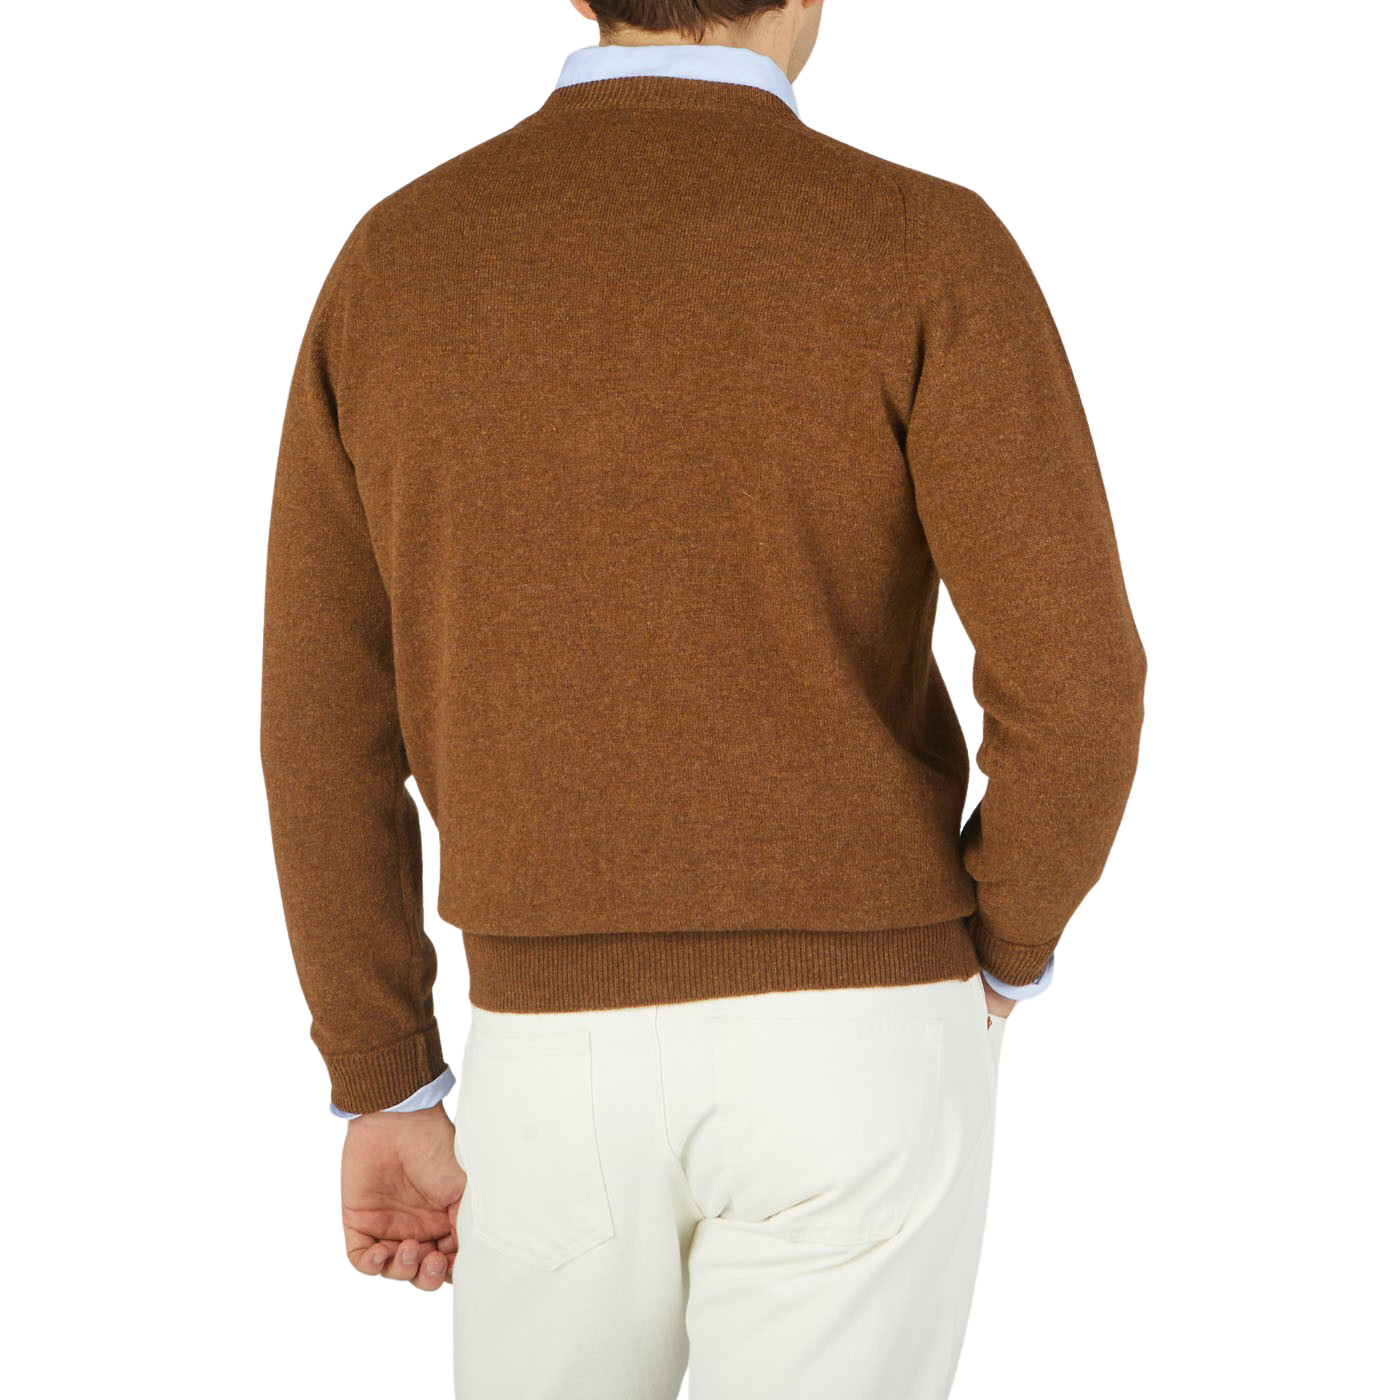 The back view of a man wearing a William Lockie Kestrel Brown Deep V-Neck Lambswool Sweater.